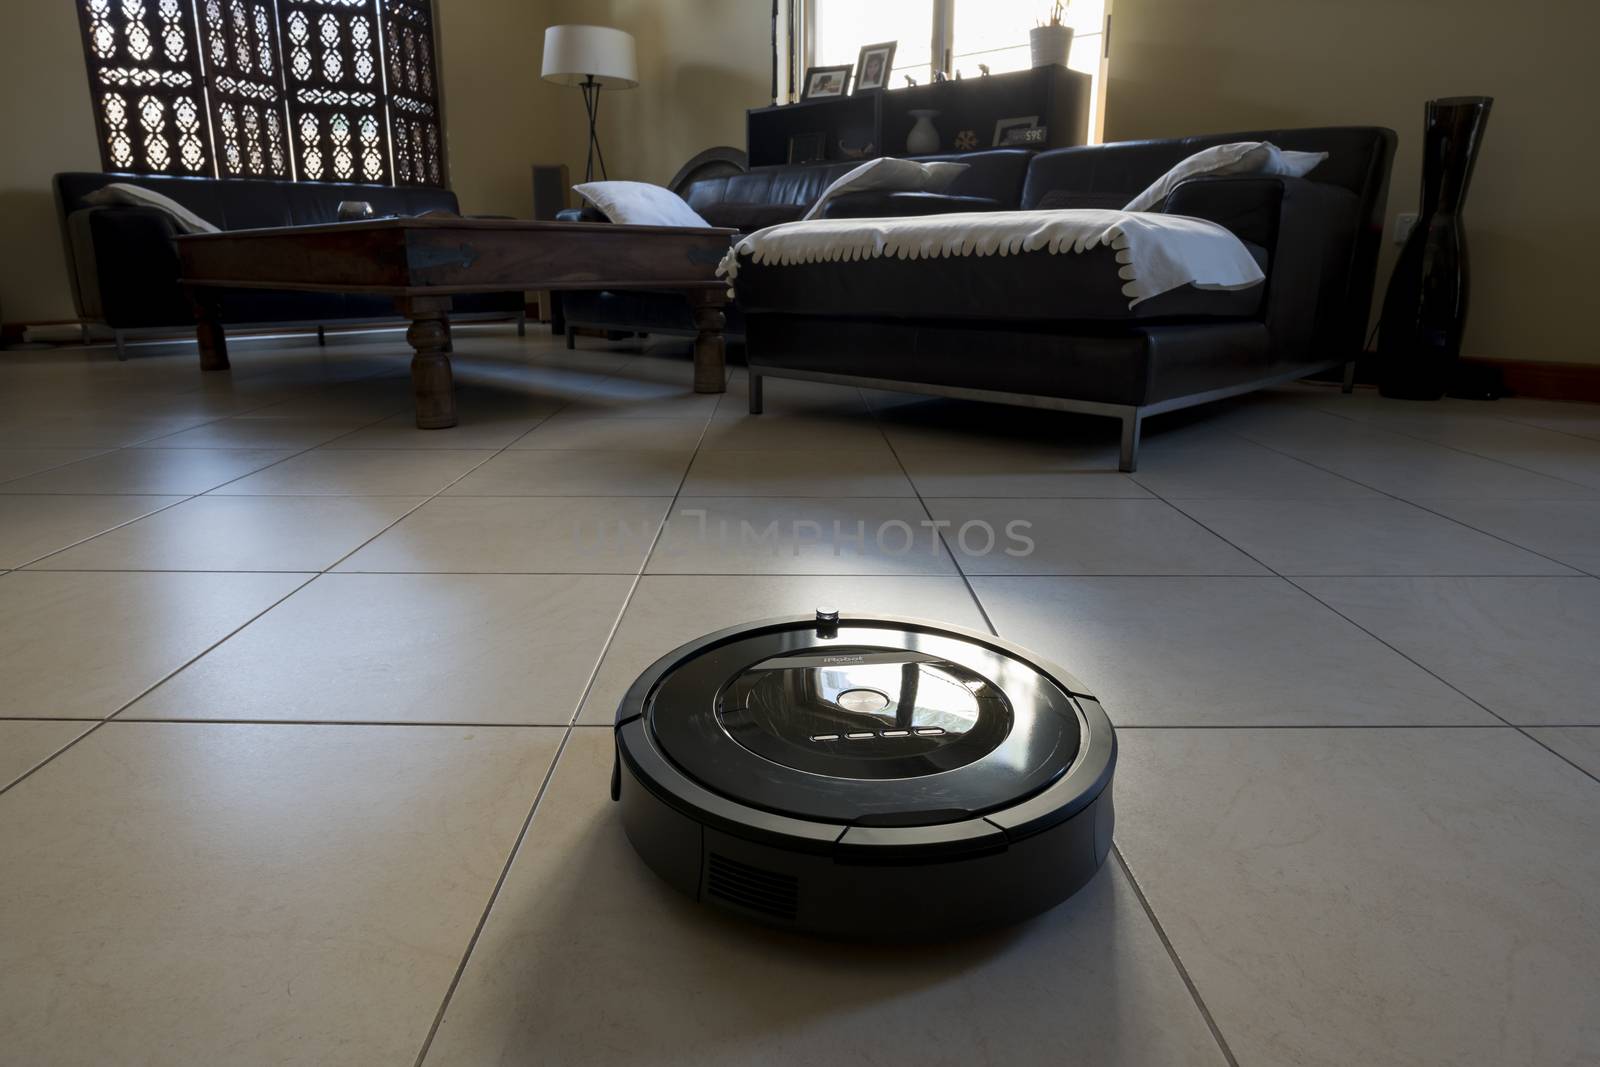 Roomba iRobot vaccum cleaner in a saloon by GABIS